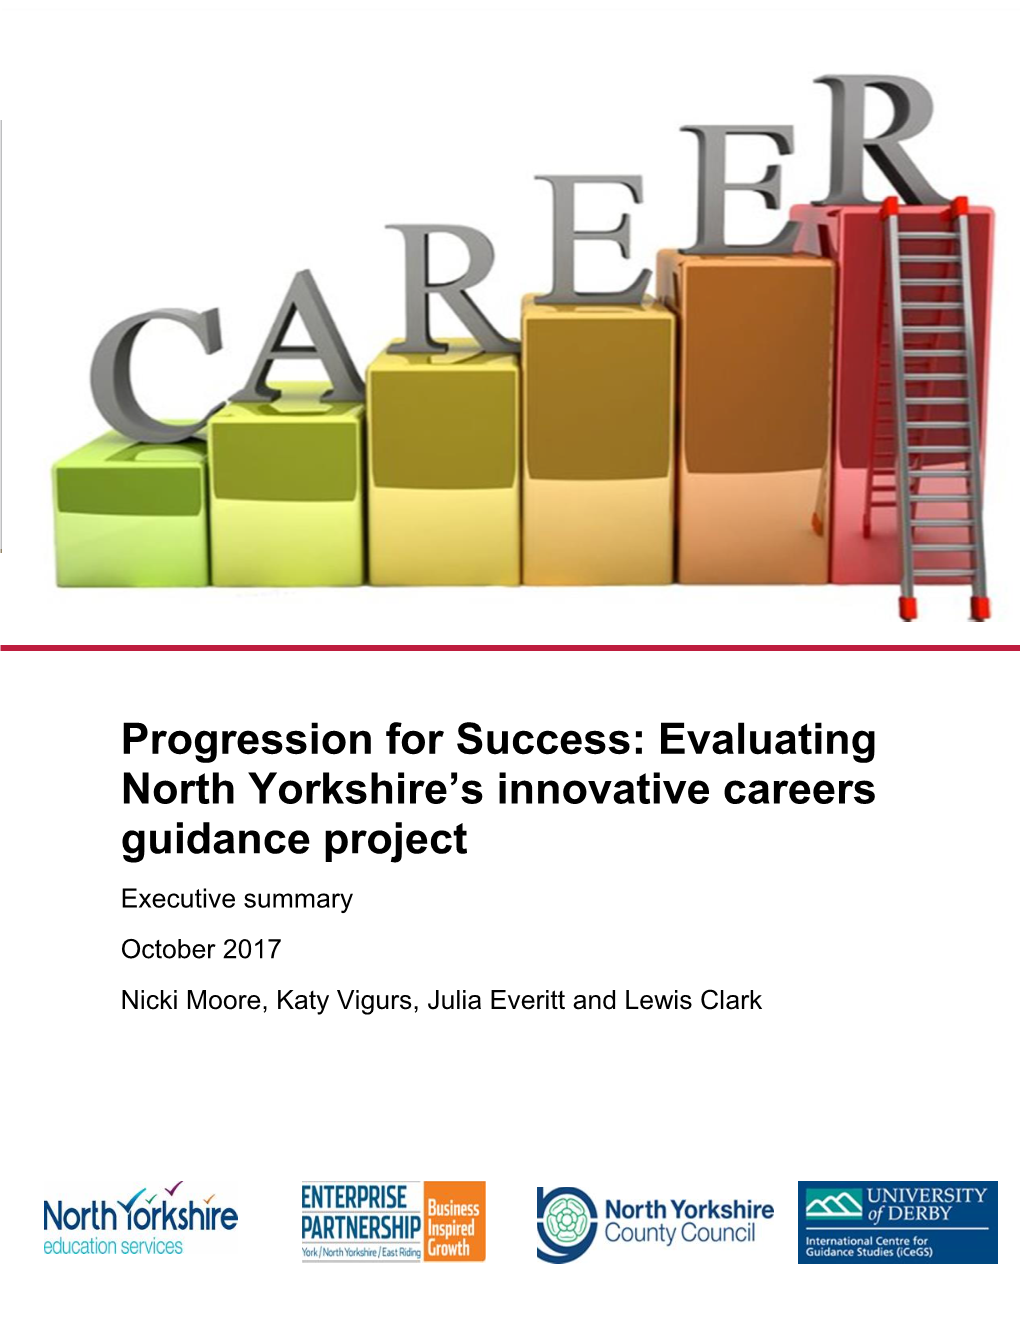 Evaluating North Yorkshire's Innovative Careers Guidance Project